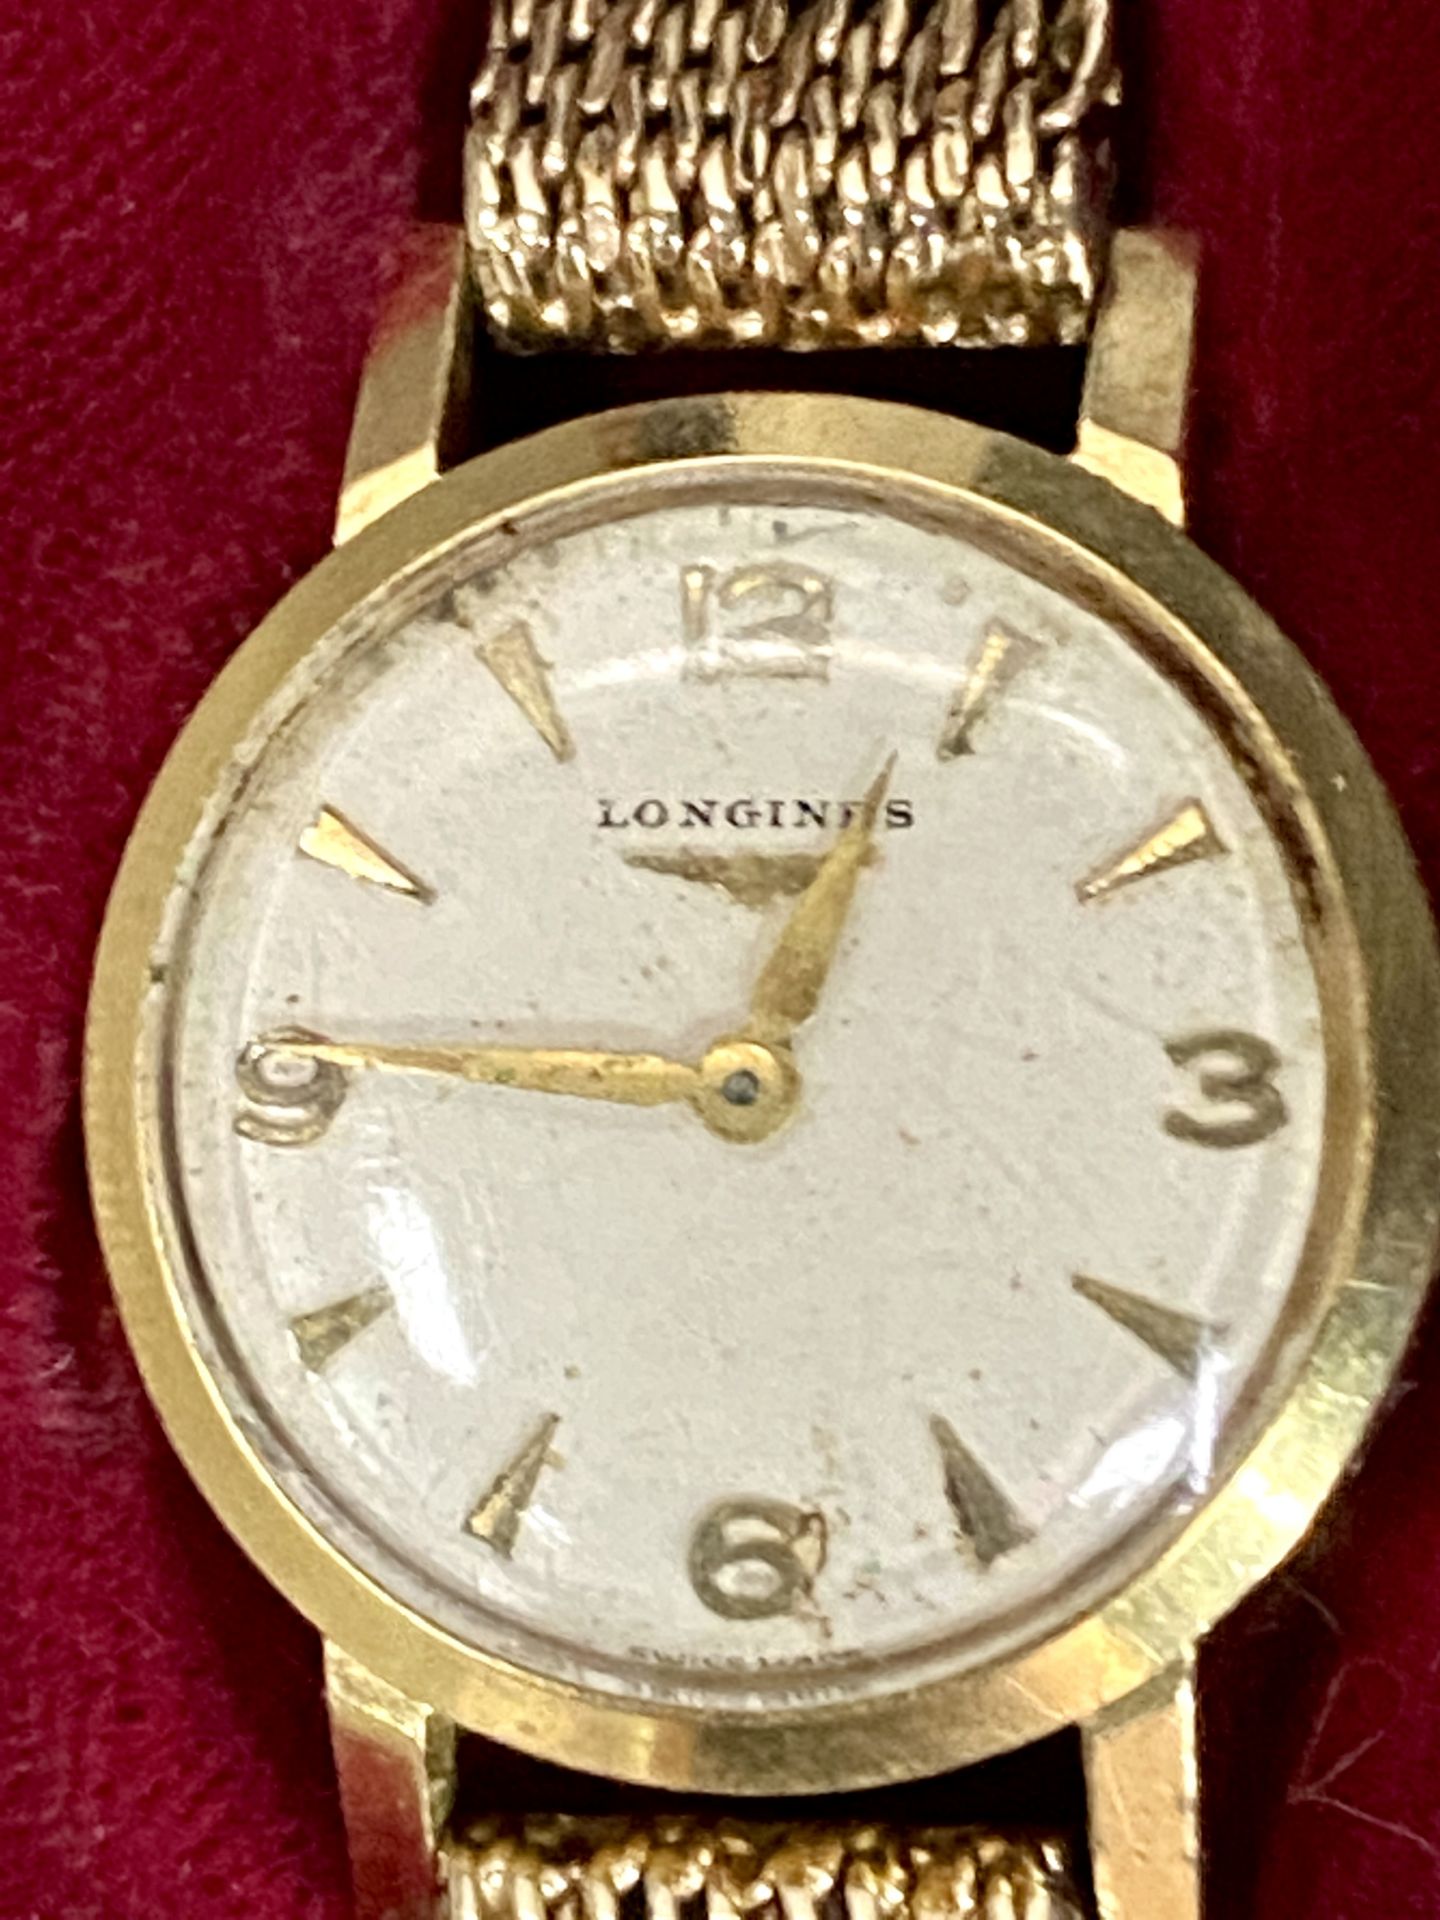 Longines 17 jewels manual wind ladies' wrist watch in 18ct gold case on 9ct gold strap